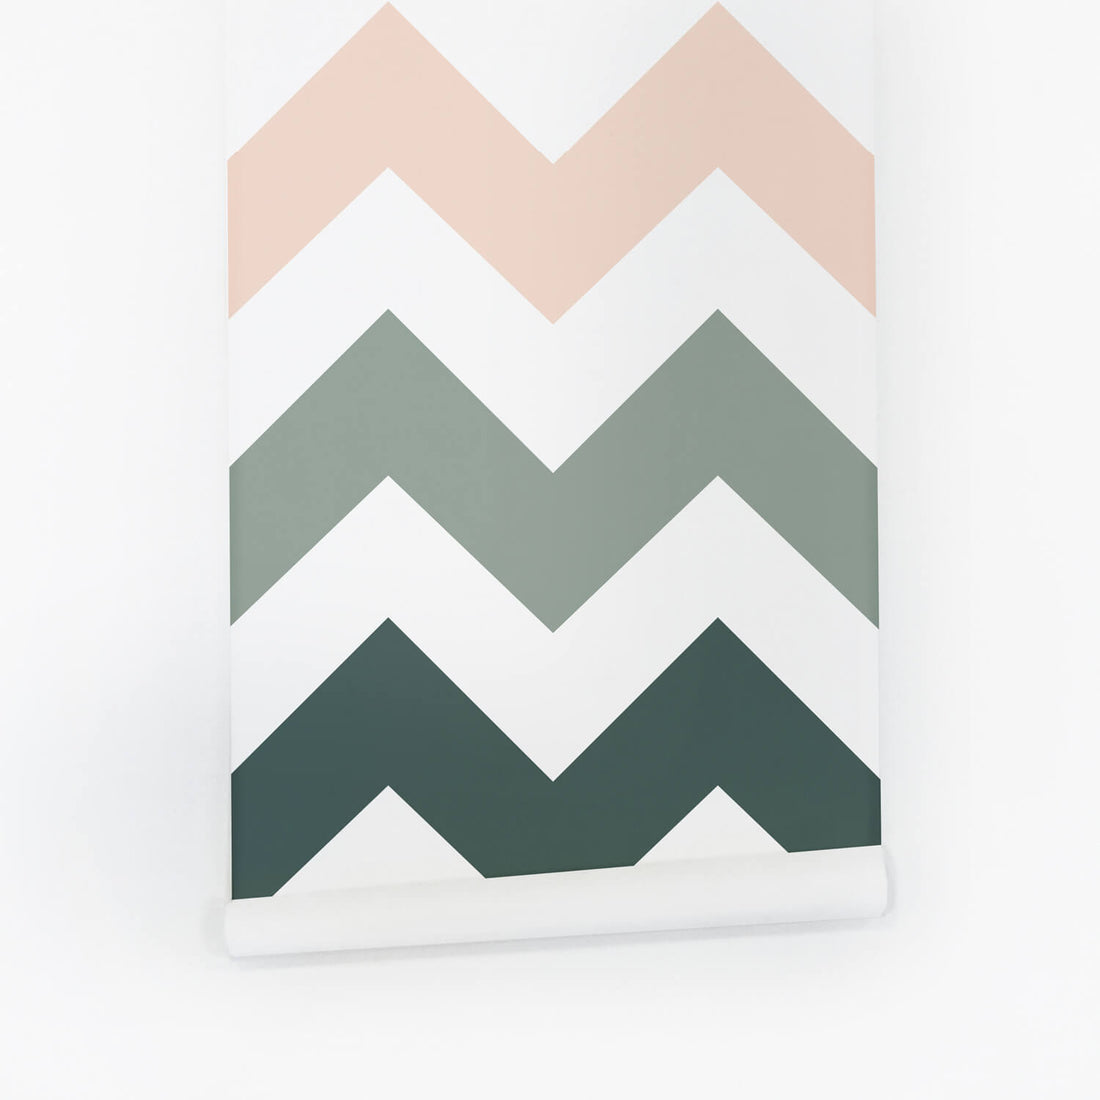 pink and green chevron pattern